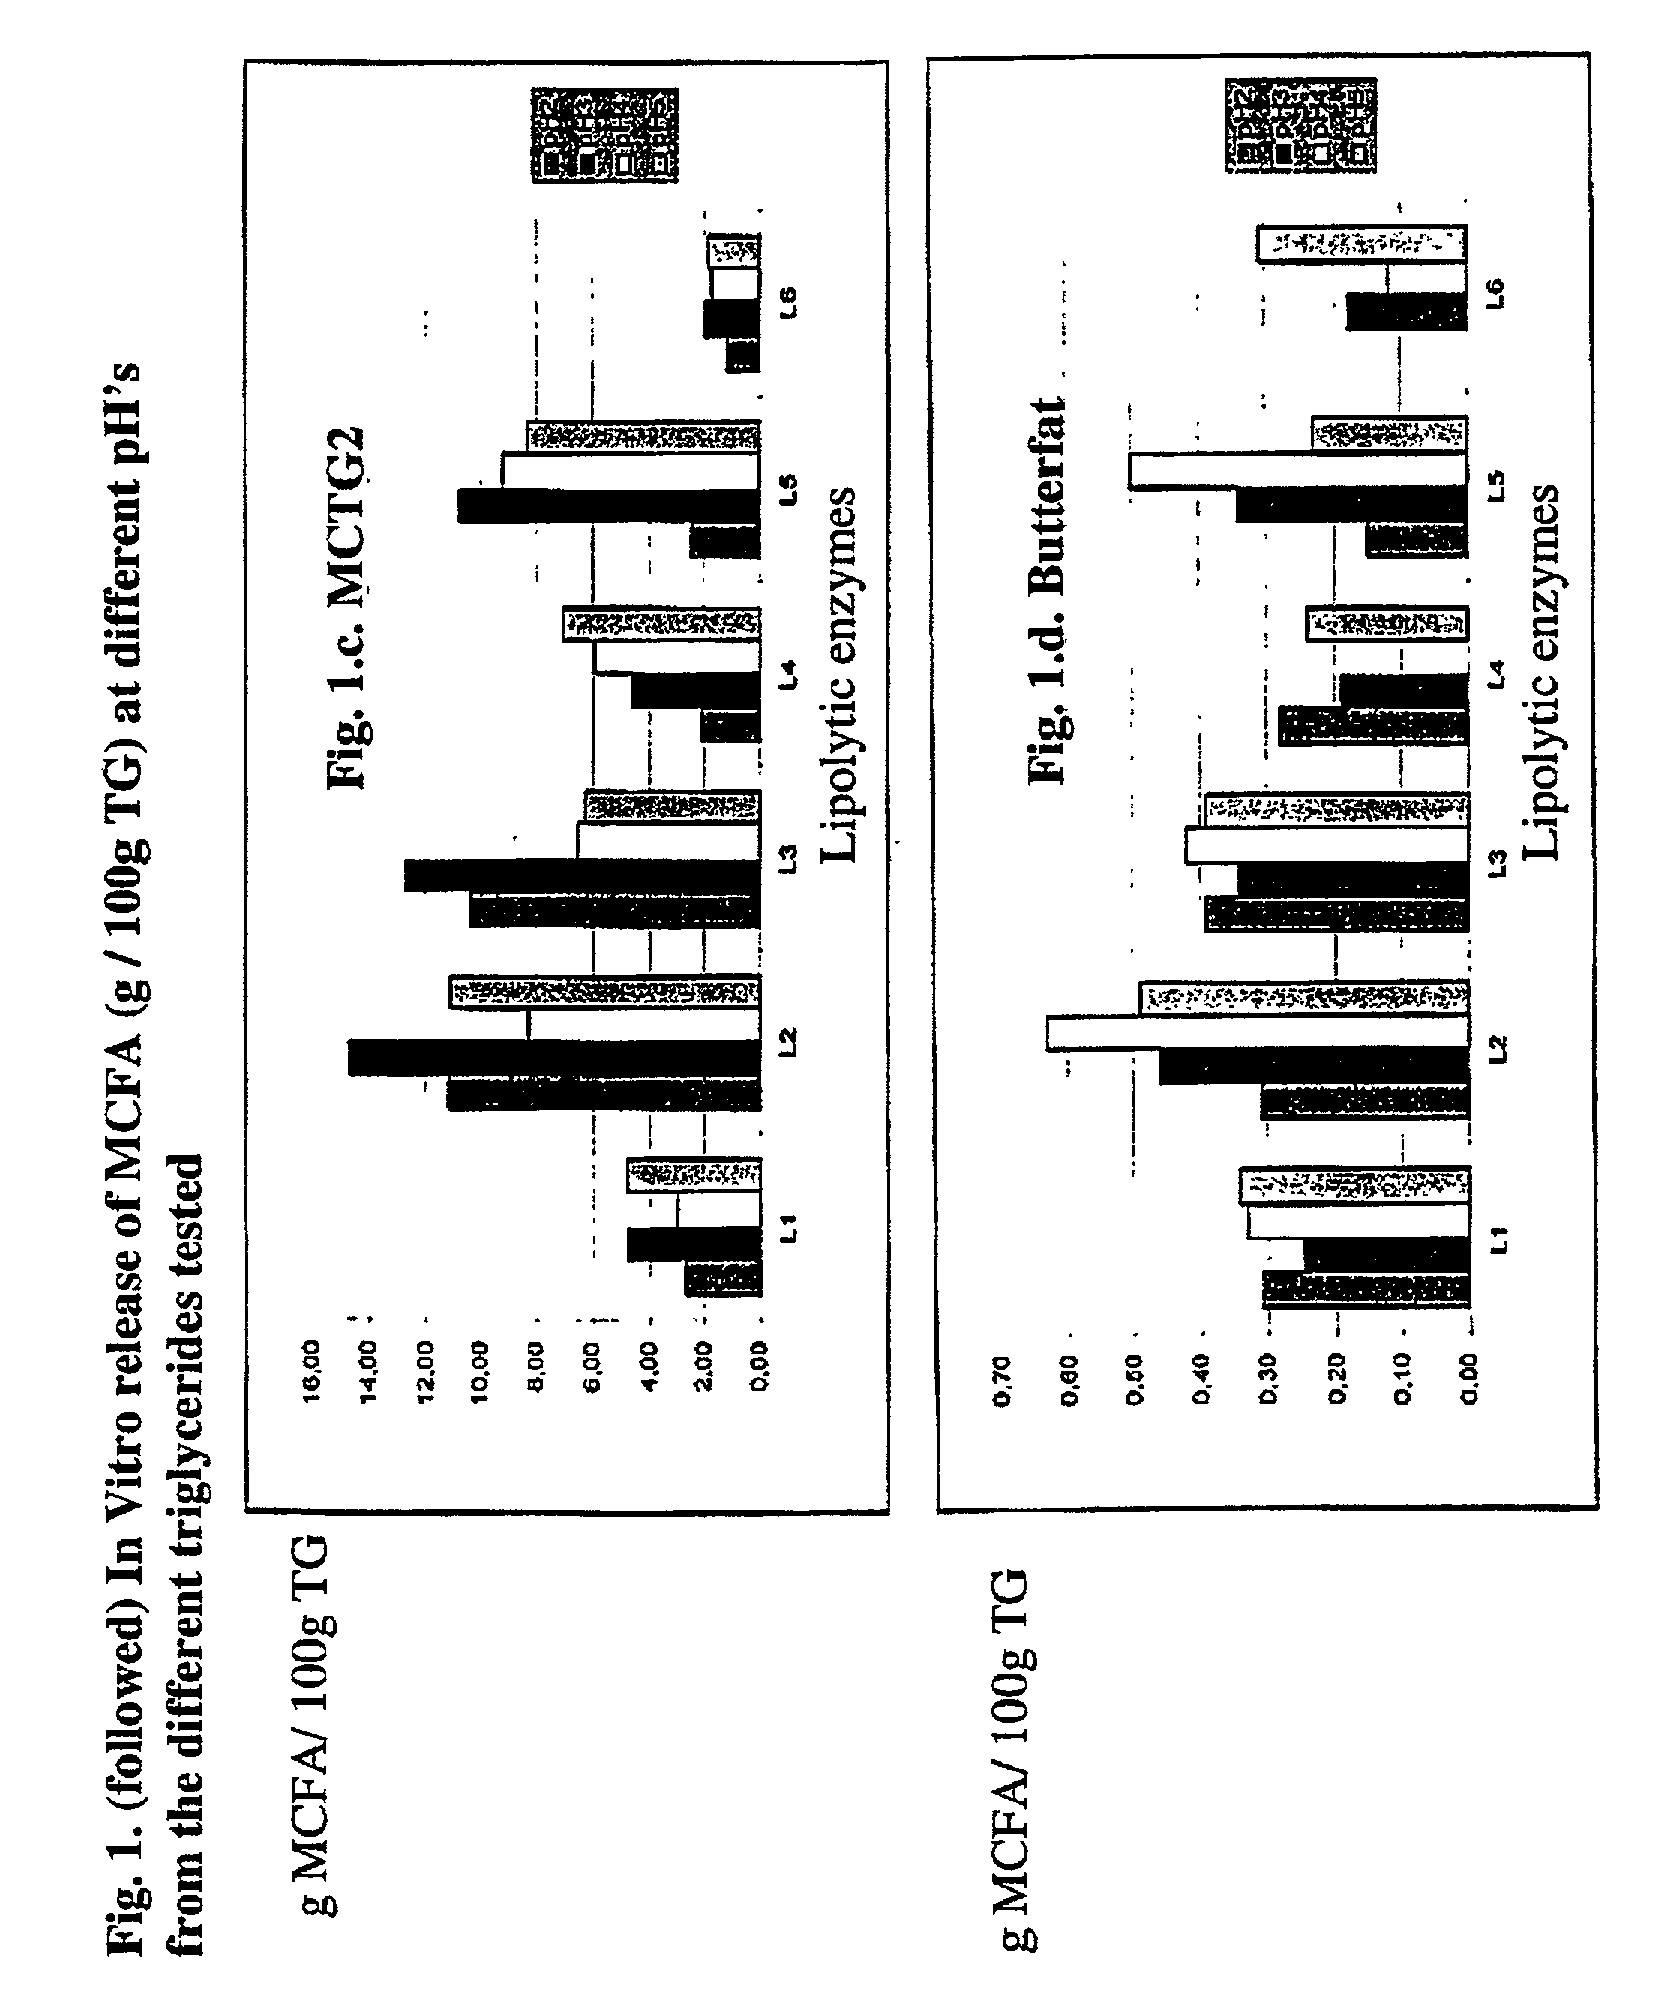 Combined use of triglycerides containing medium chain fatty acids and exogenous lipolytic enzymes as feed supplements